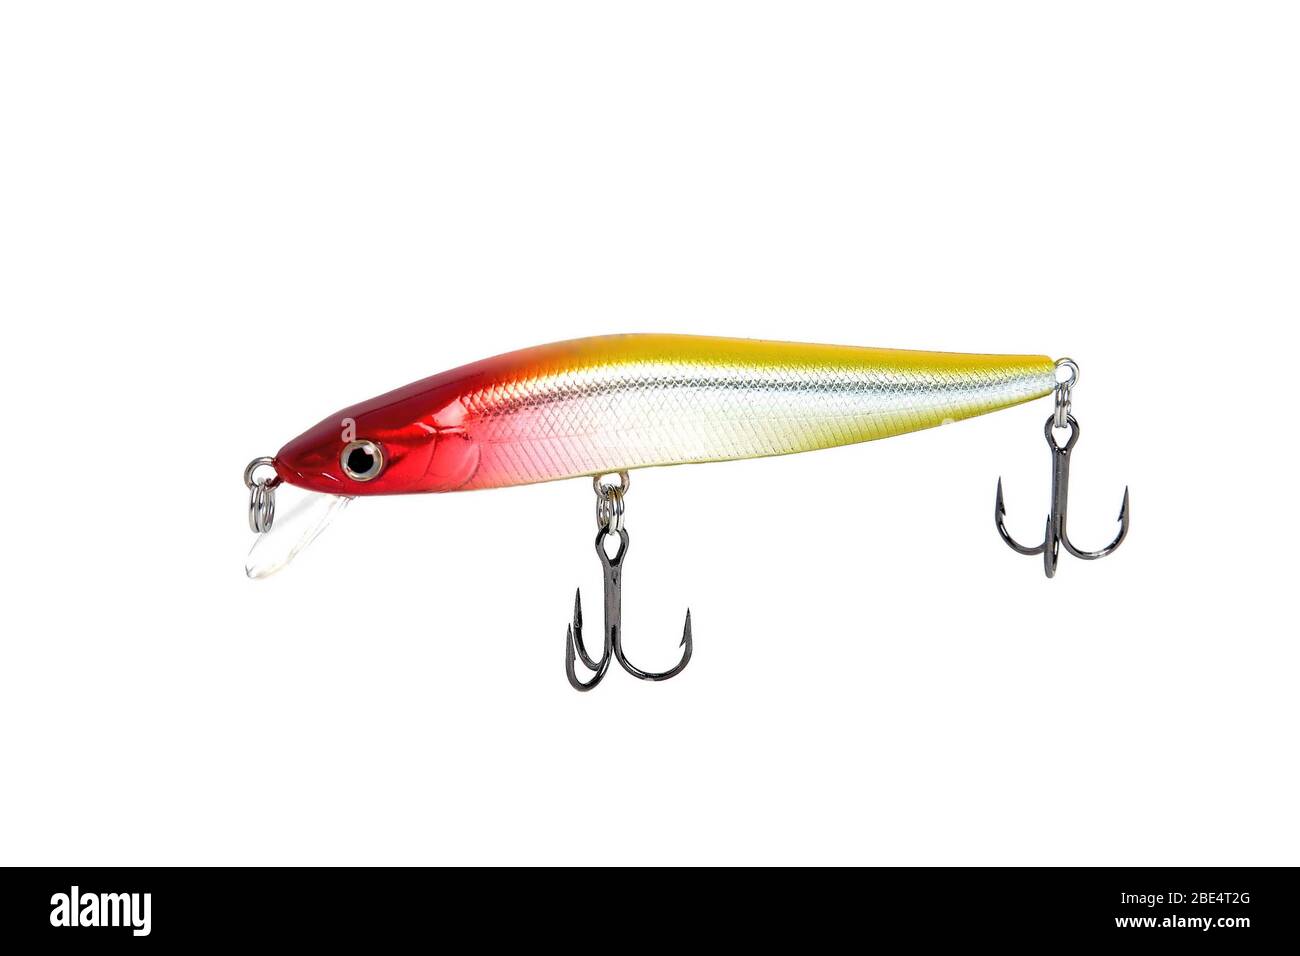 Fishing wobbler with red head, yellow back and white belly. Close-up on a white background. Stock Photo